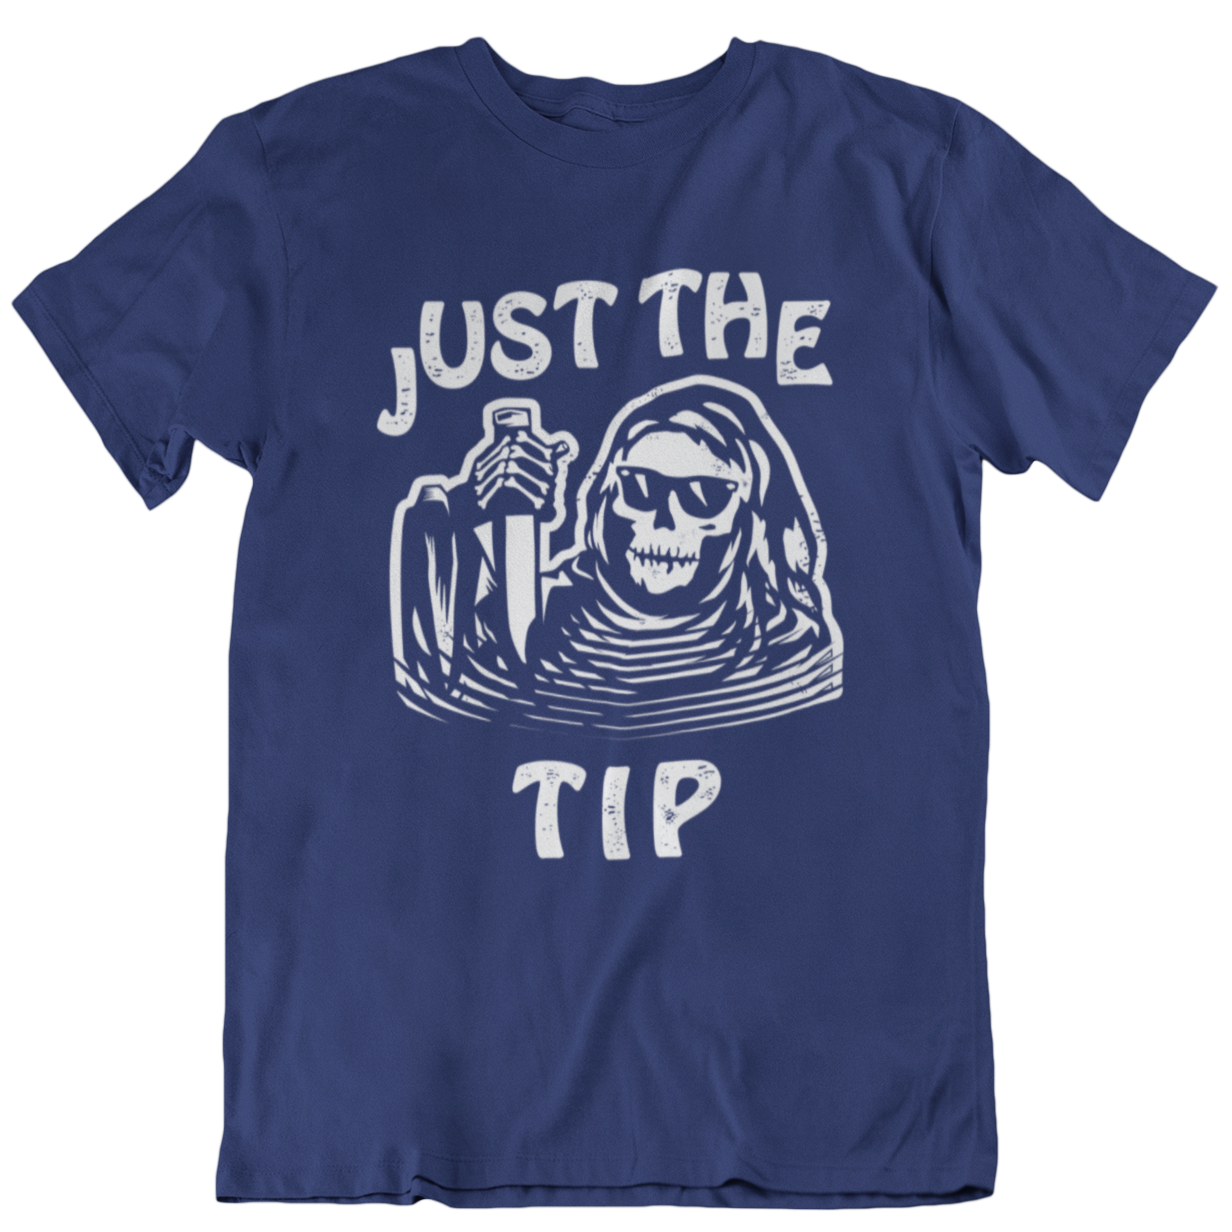 Funny navy blue t-shirt for Latino men. The graphic is a humorous play on words. There is a tattoo-style skeleton holding a knife, and the words surrounding the image state "Just the Tip"